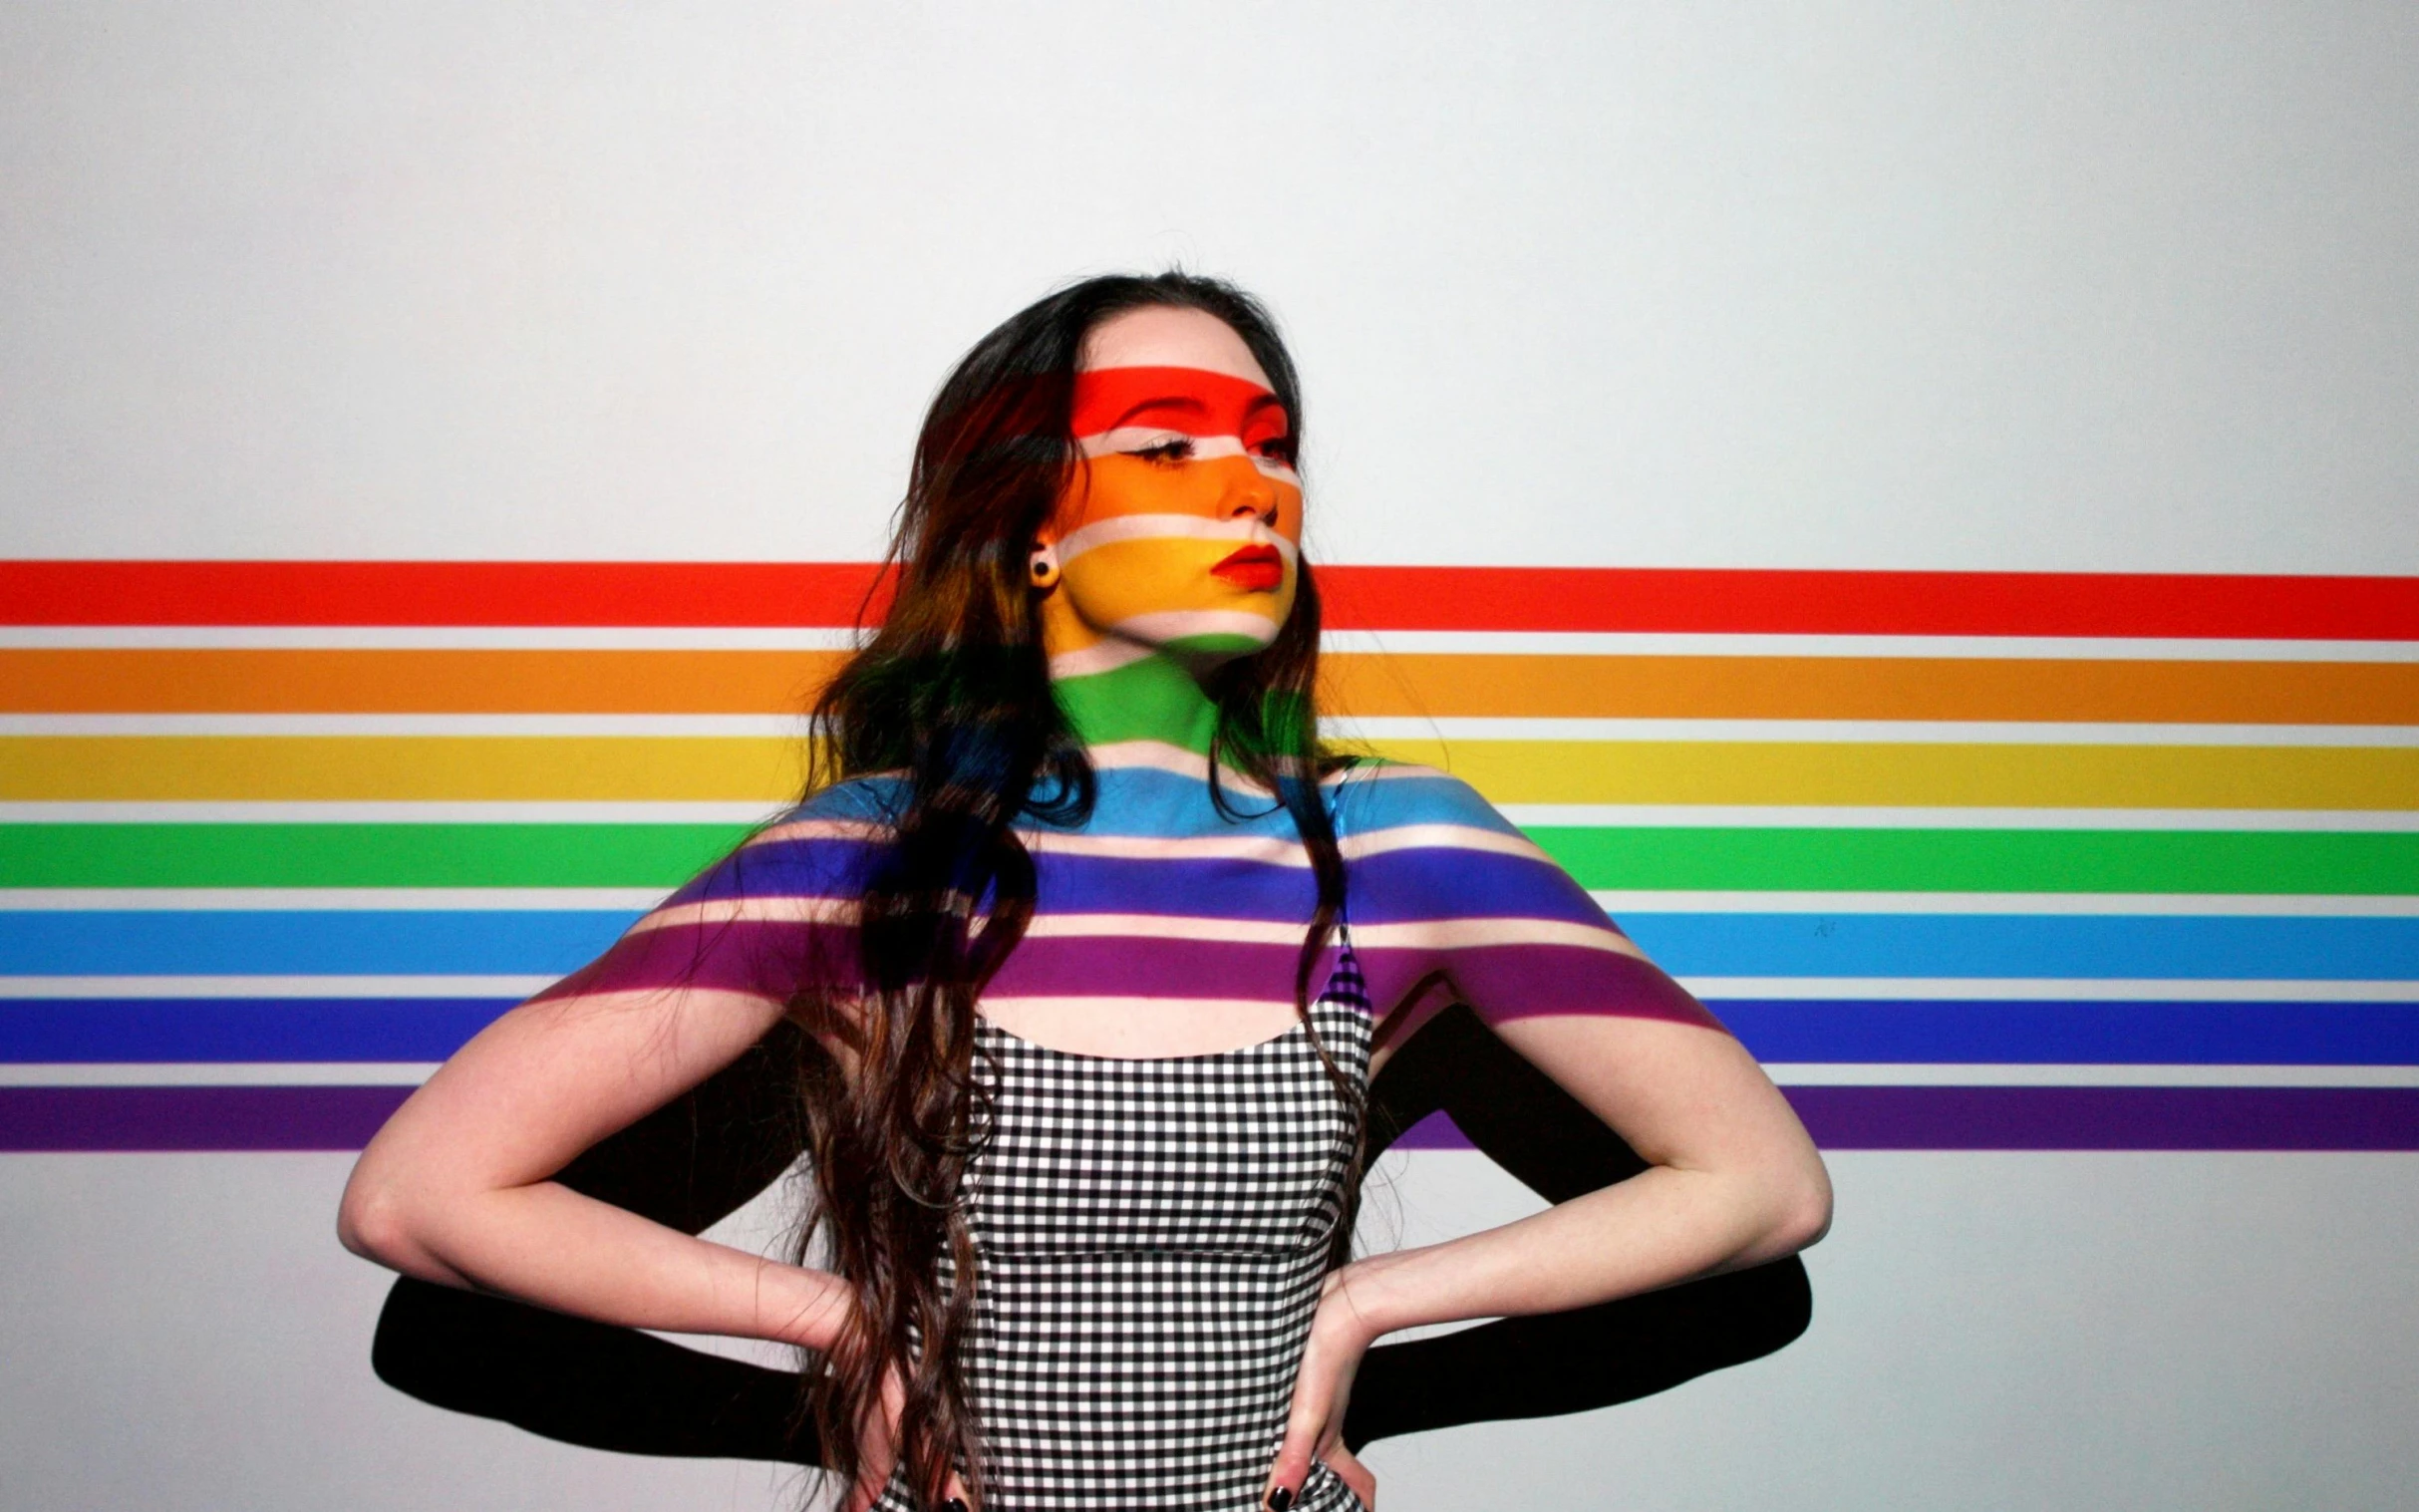 a young woman has her hands in her hair as she looks down as the background is colored by rainbow